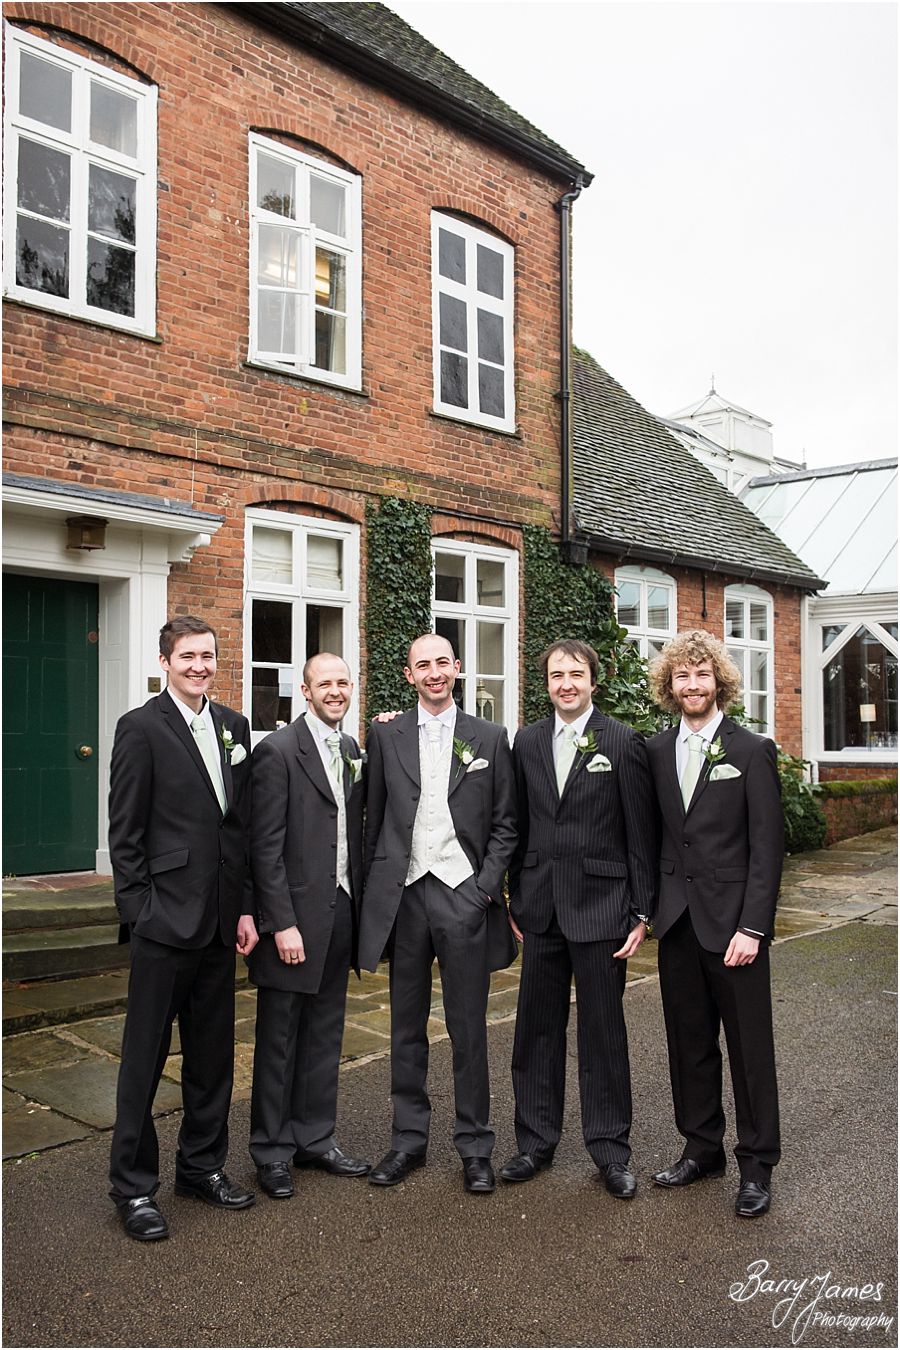 Contemporary and fun portraits of groom and groomsmen at The Moat House in Acton Trussell by Cannock Wedding Photographer Barry James